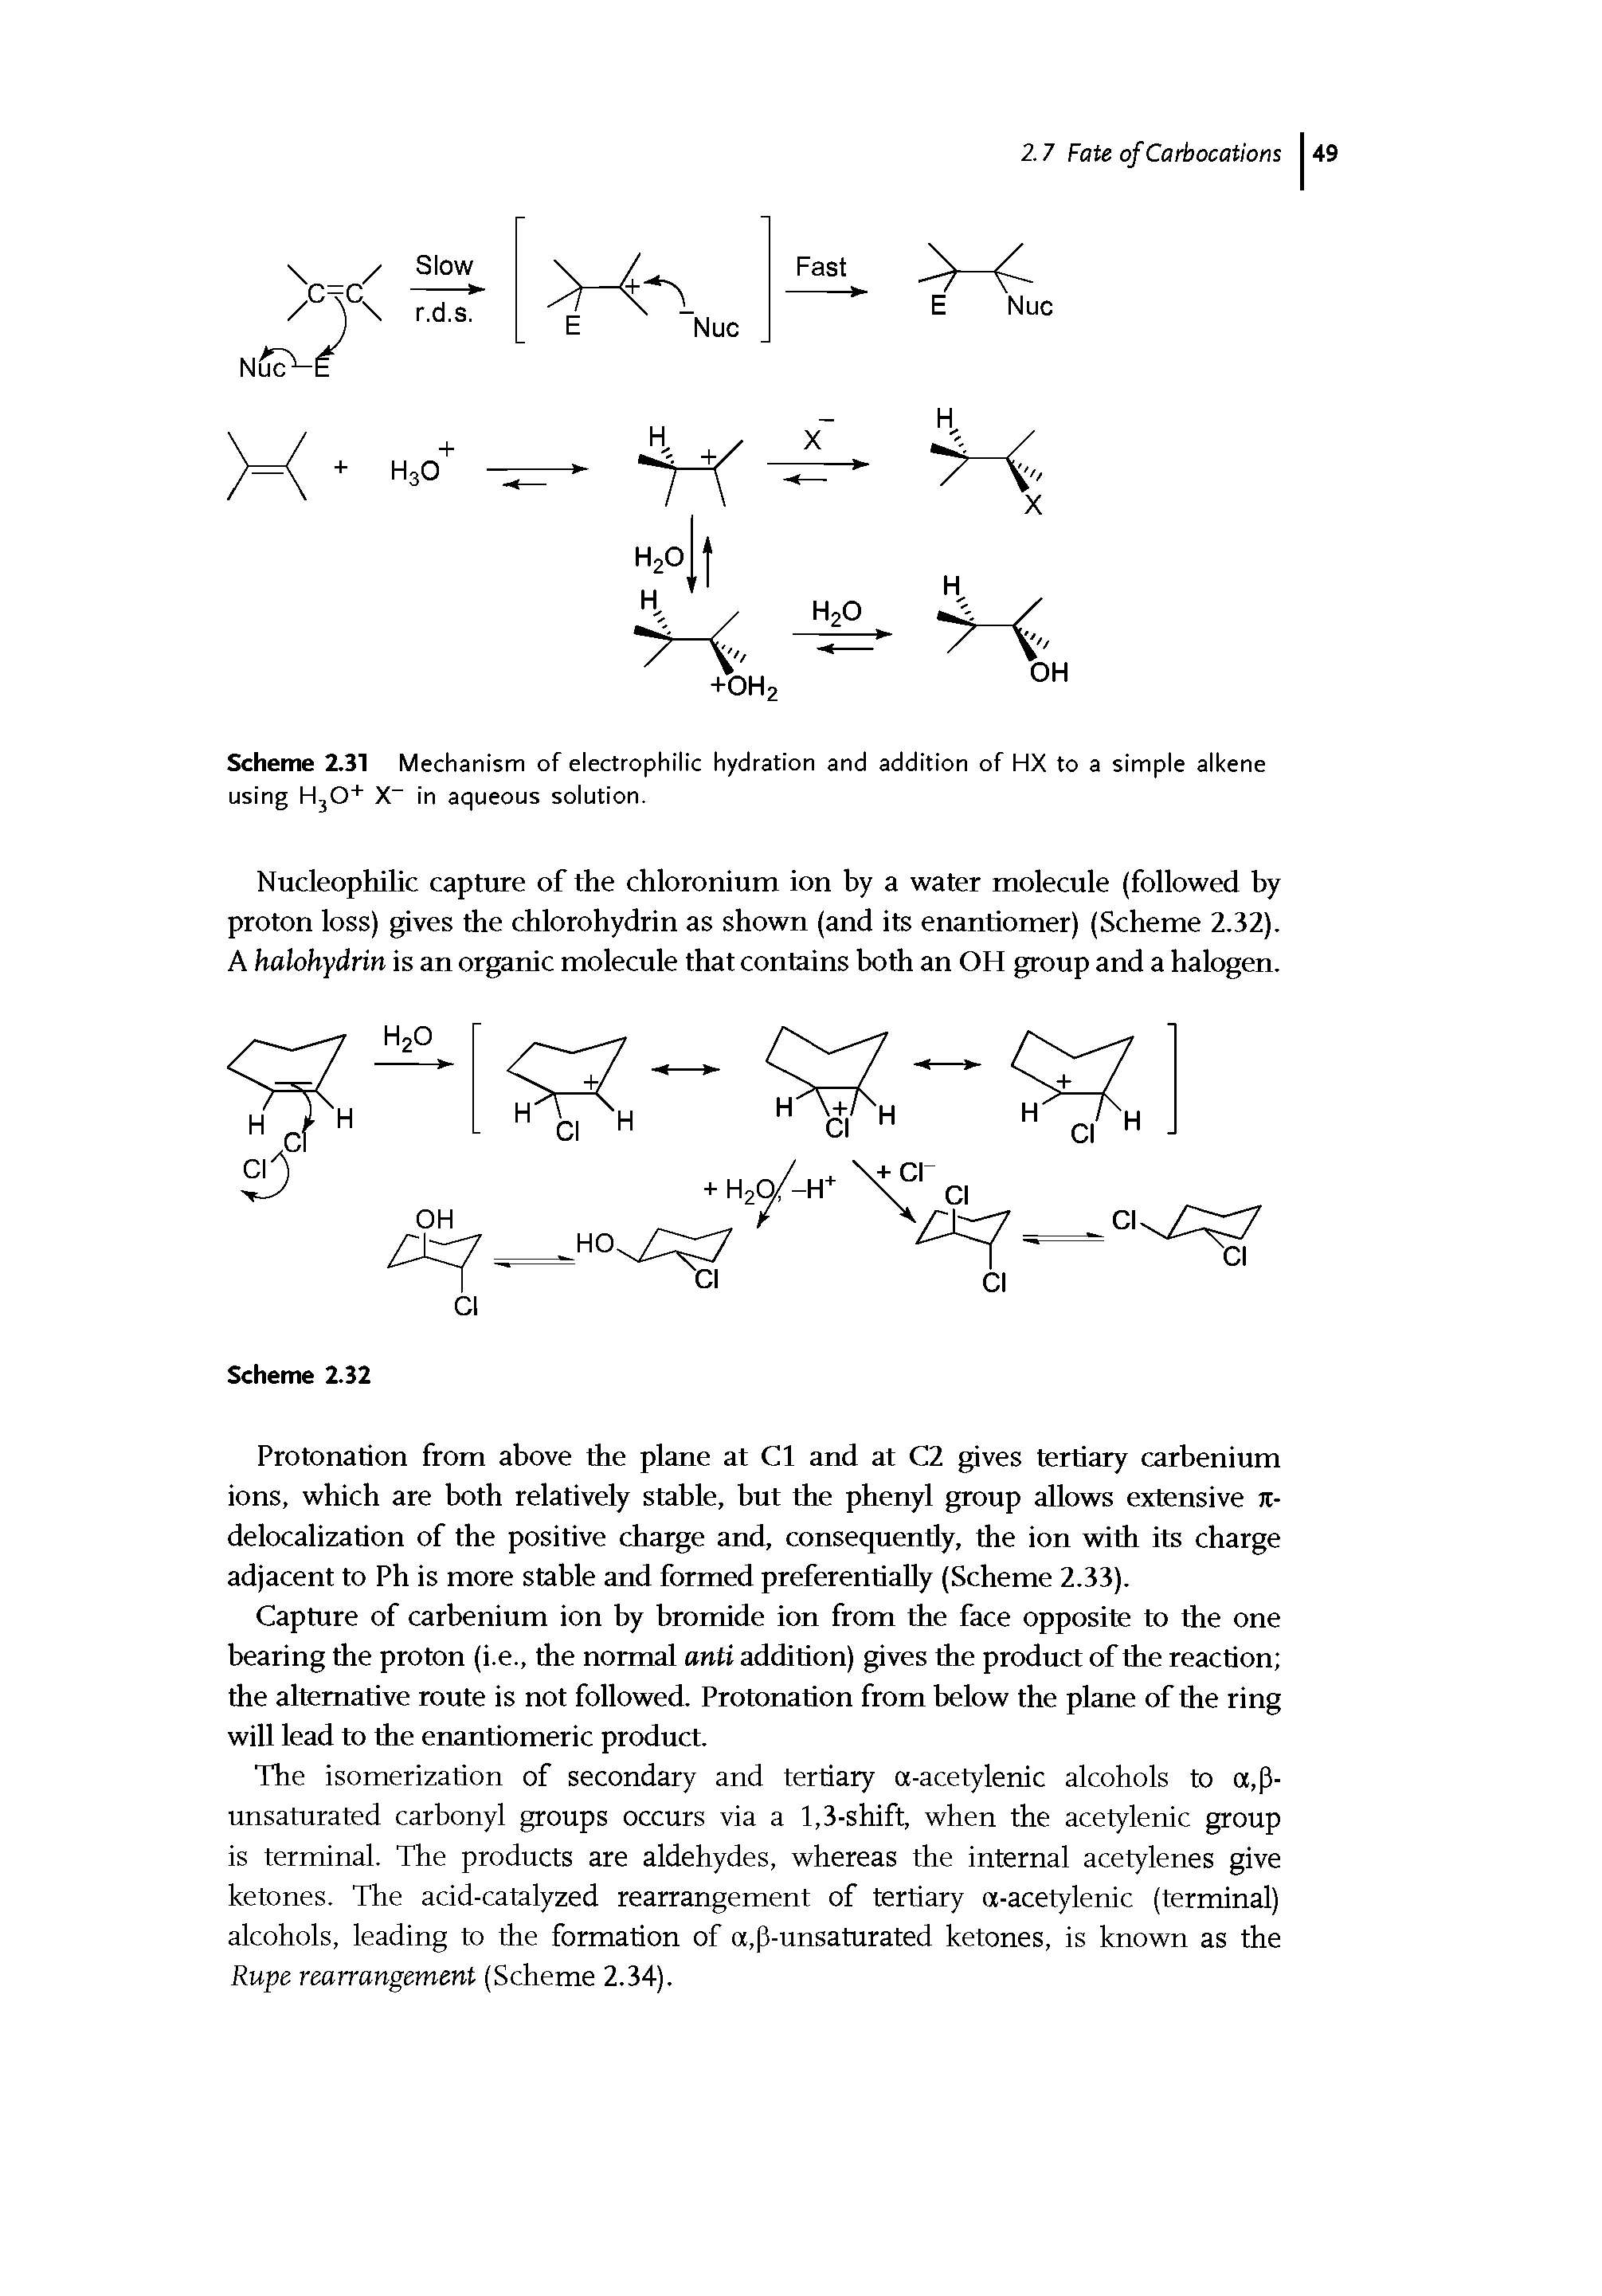 Scheme 2.31 Mechanism of electrophilic hydration and addition of HX to a simple alkene using HjO X in aqueous solution.